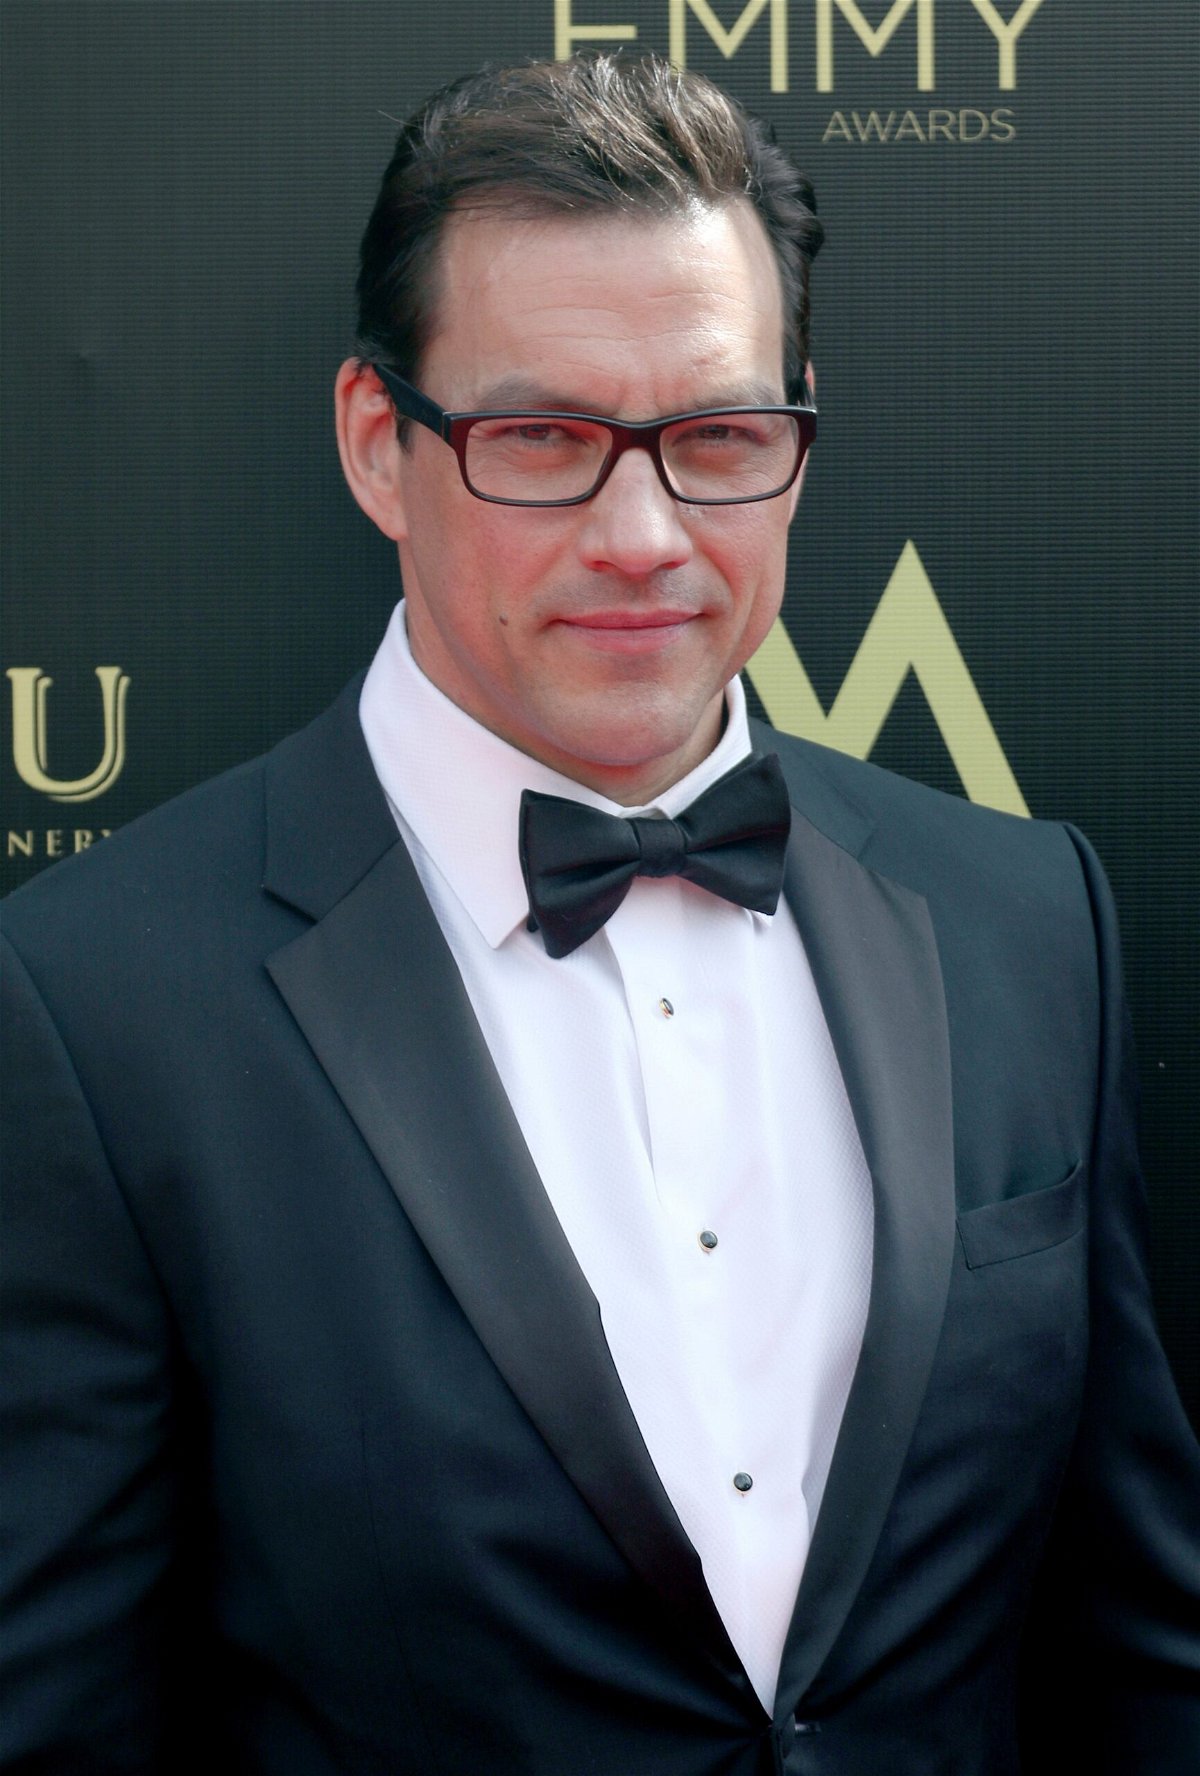 Tyler Christopher dead: 'General Hospital' soap opera actor dies at 50